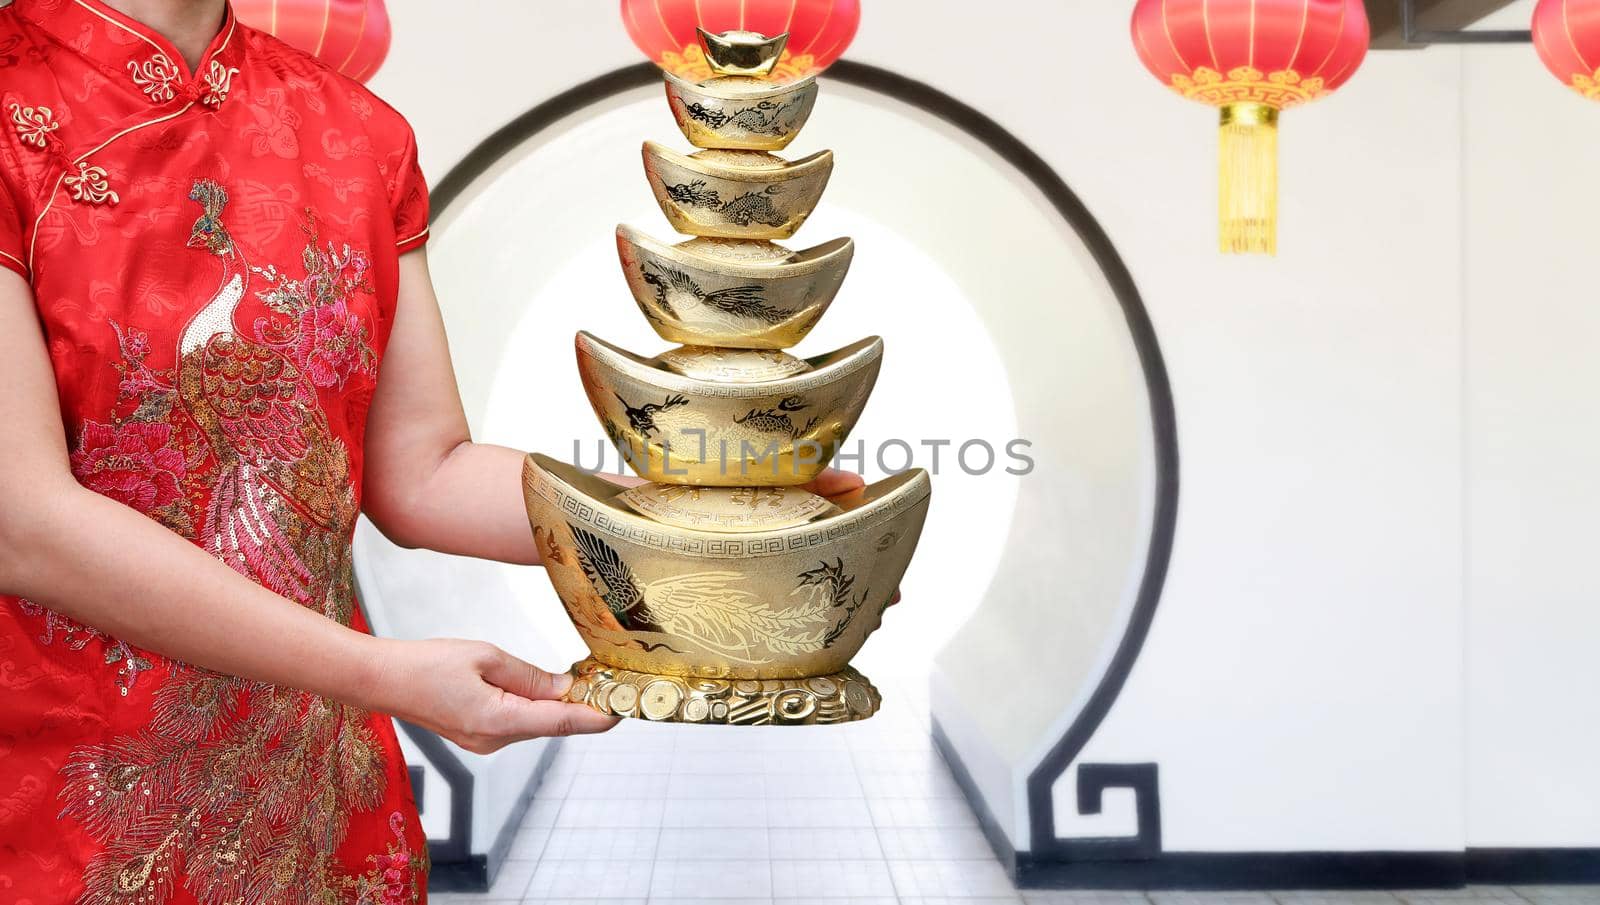 Chinese new year gold ingot (qian) with blessing text mean happy ,healthy and wealth in china town. by toa55